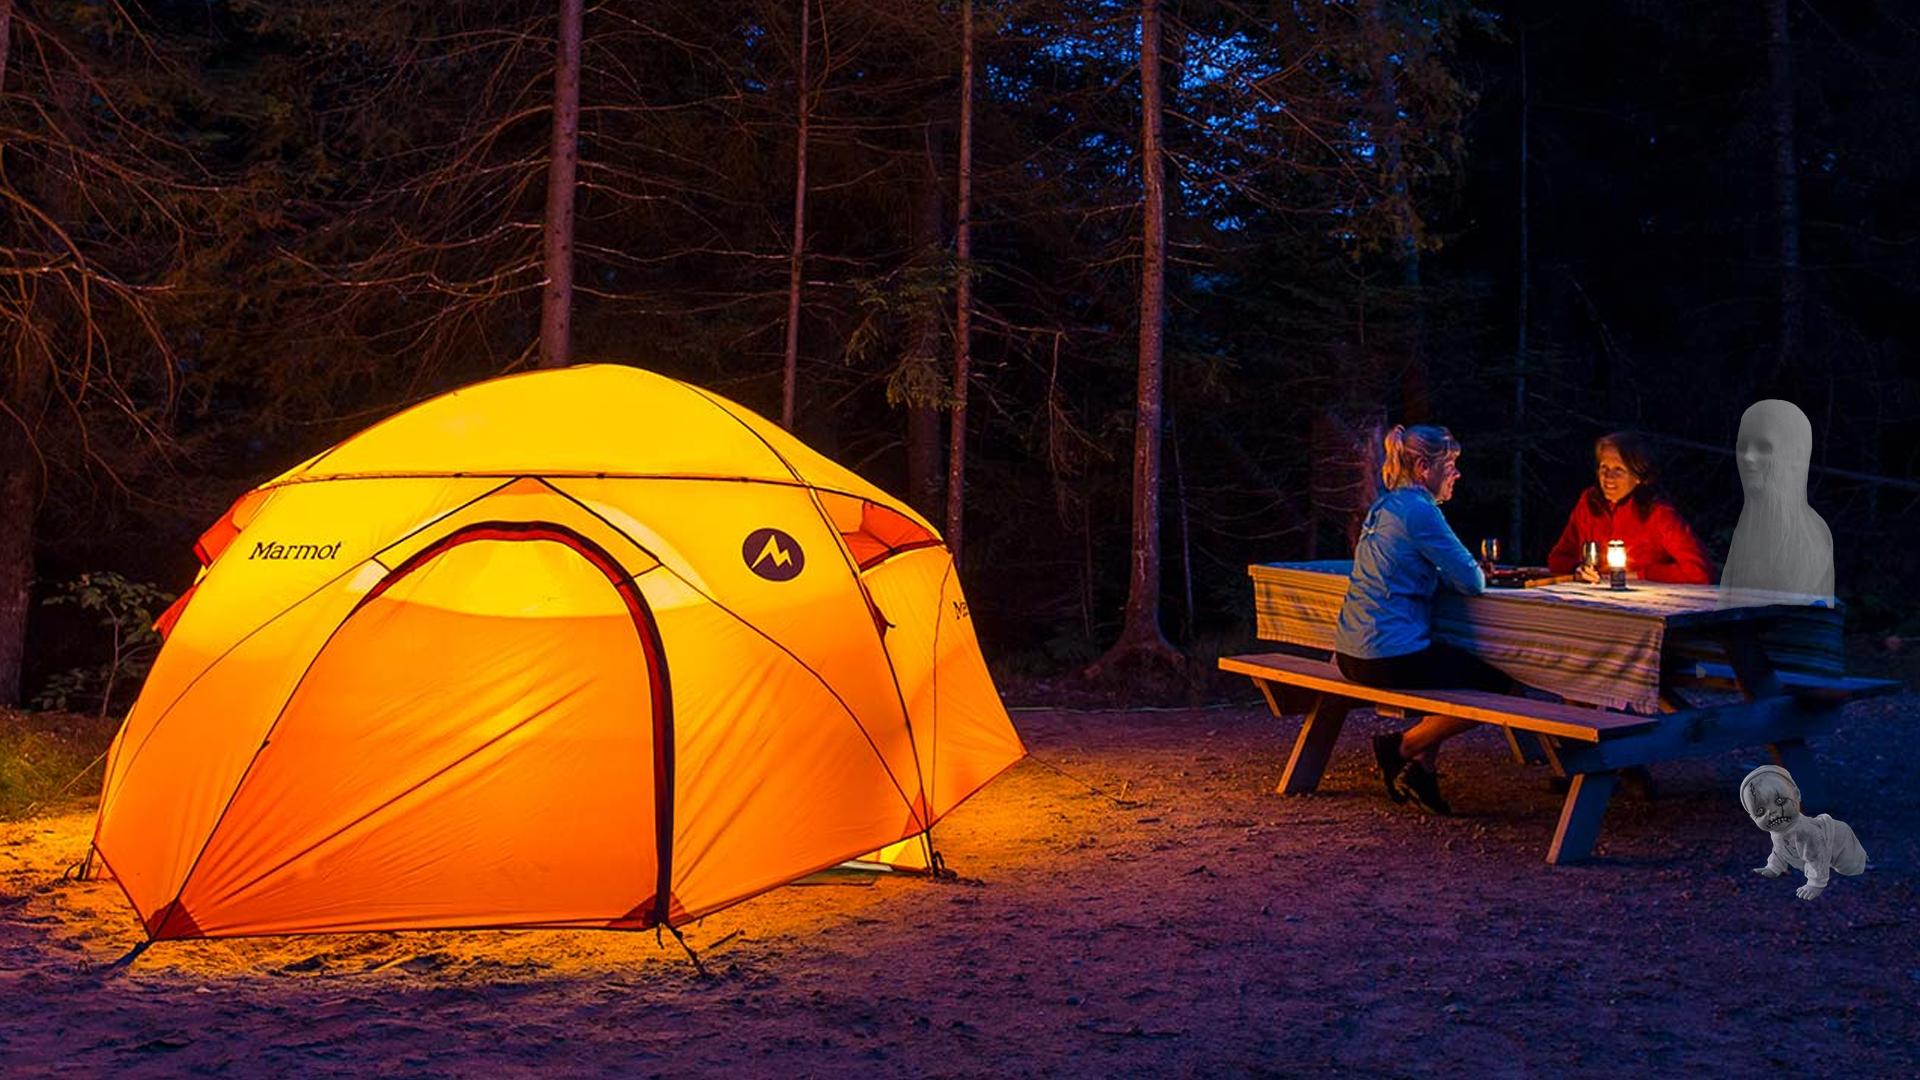 She is at camp. Палатка Camping Tent. Палатка kailas Holiday 4 Camping Tent Inca Yellow. Туризм с палатками. Поход с палатками.